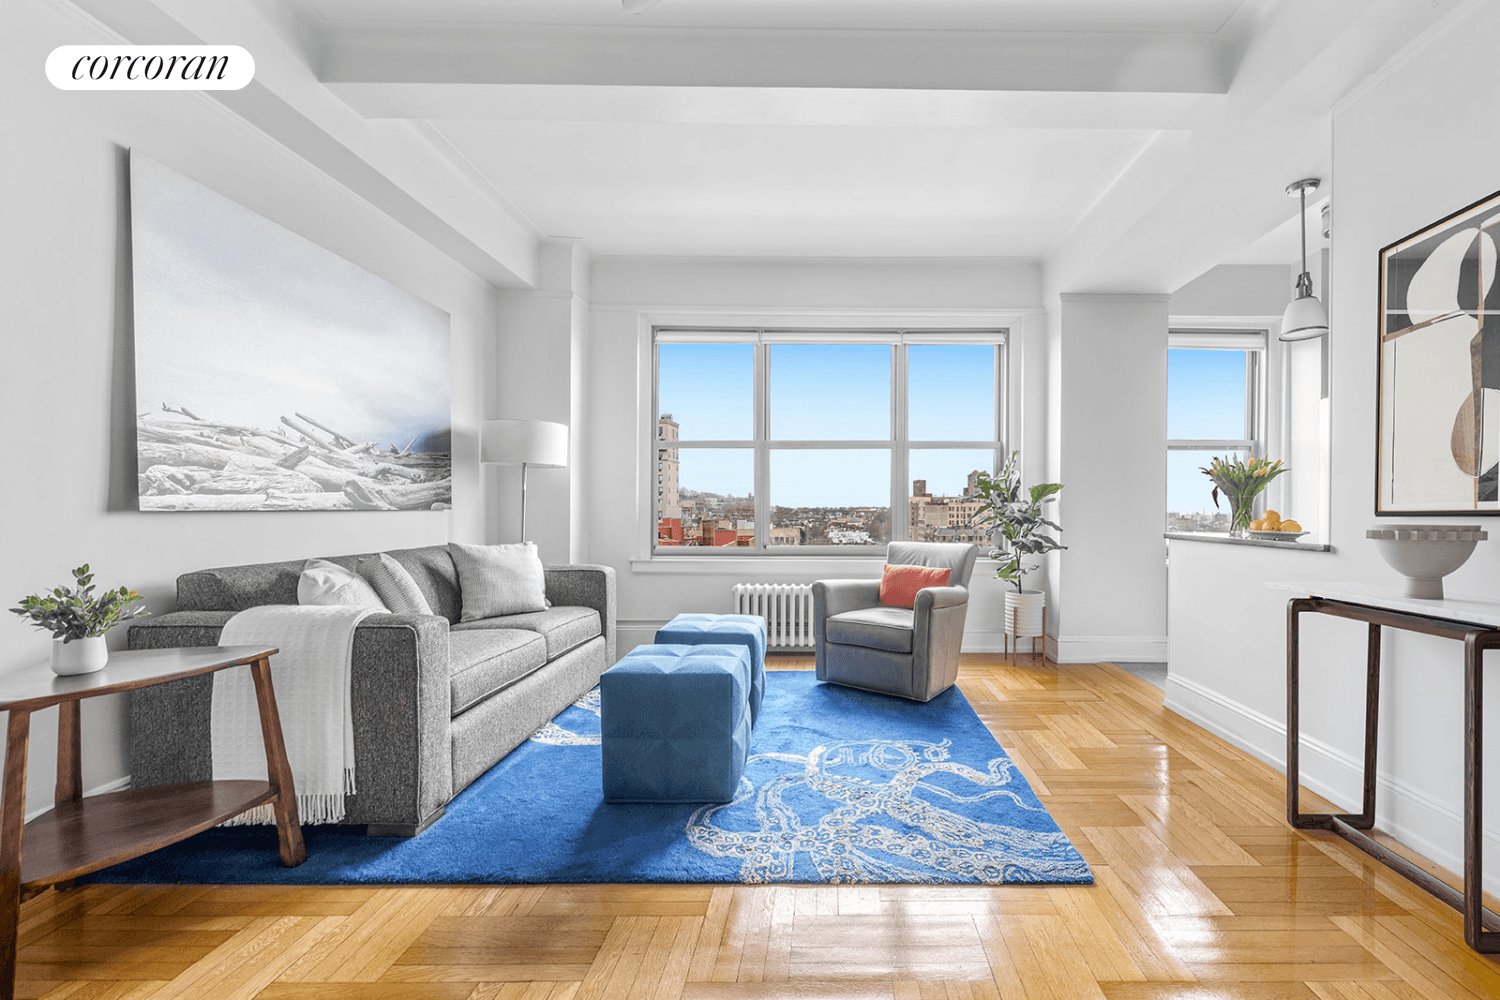 Live life at the top of the slope in this magnificent tenth floor two bedroom, one bath coop in one of Park Slope's most coveted buildings.